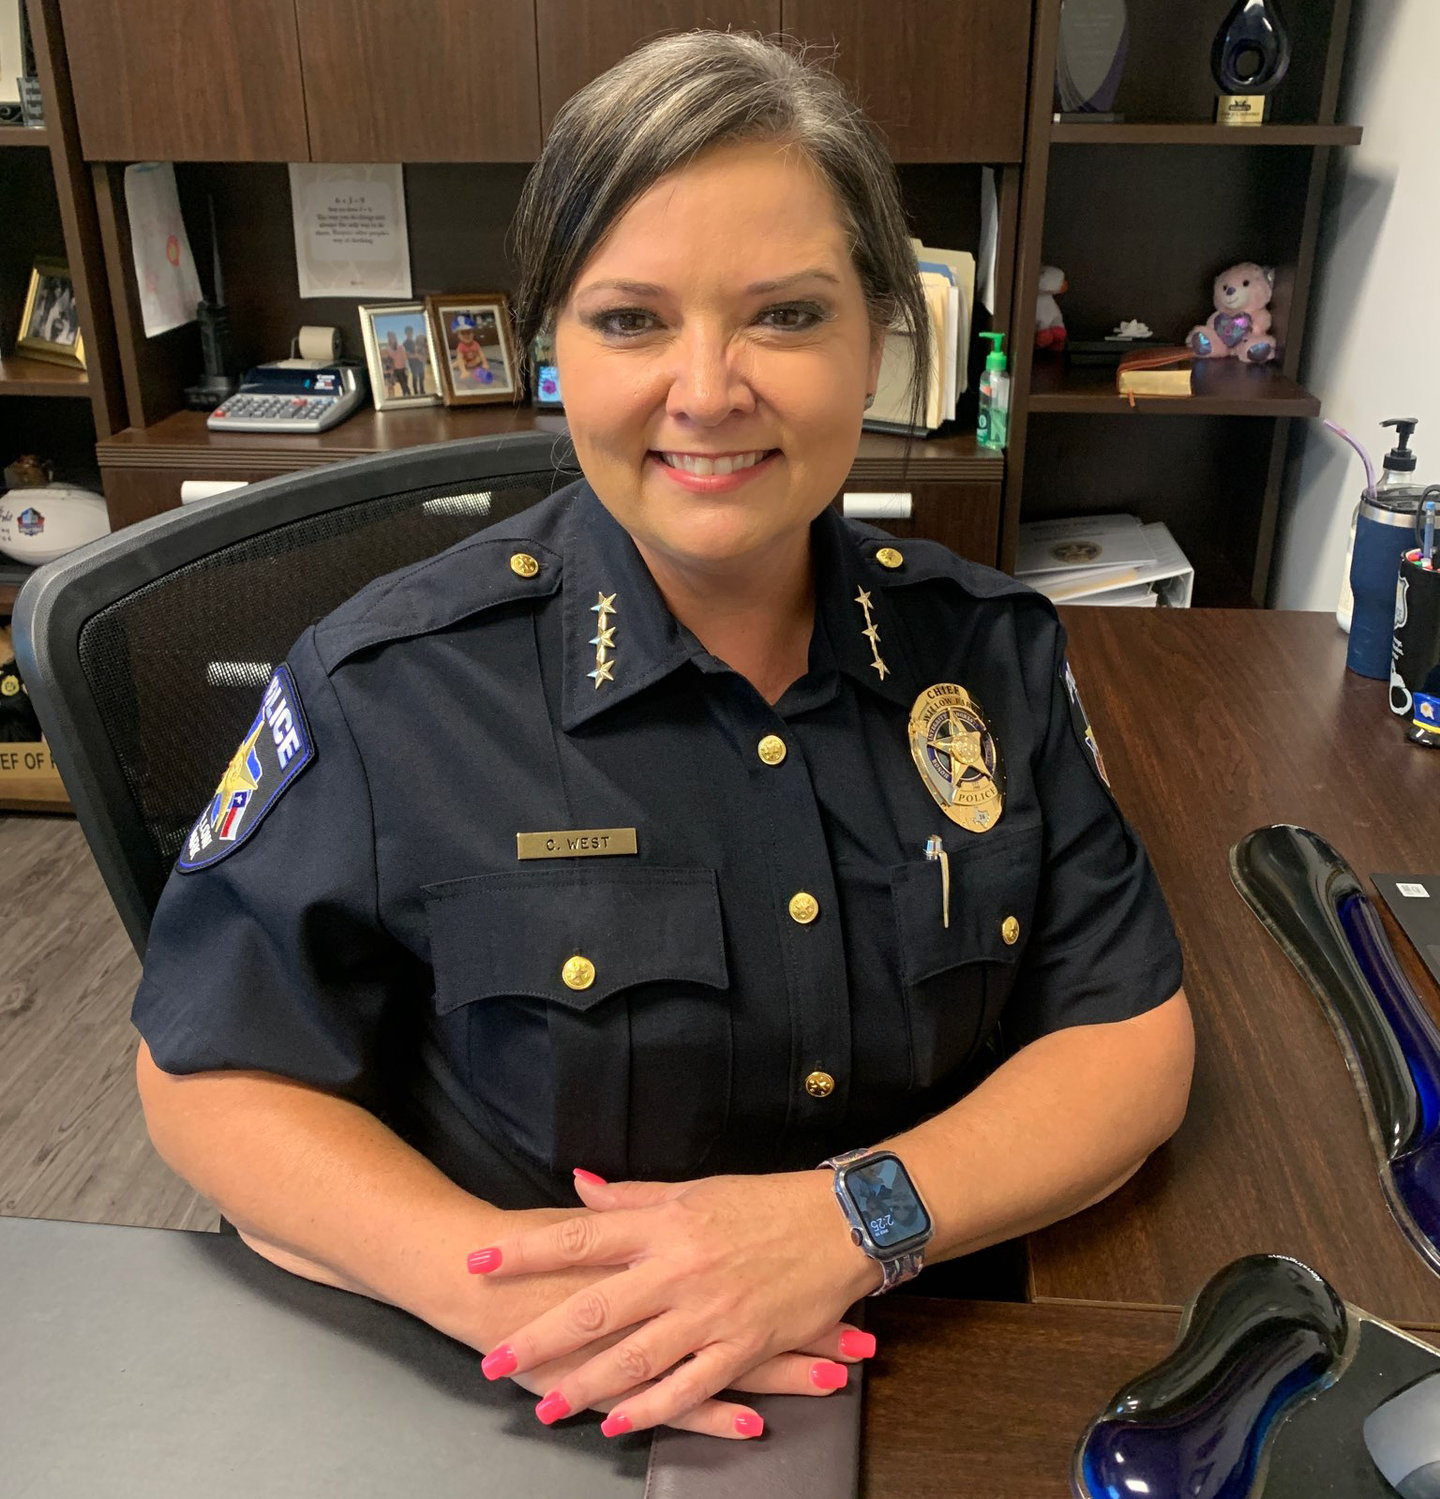 Carrie Ellis has been the police chief in Willow Park for six years.